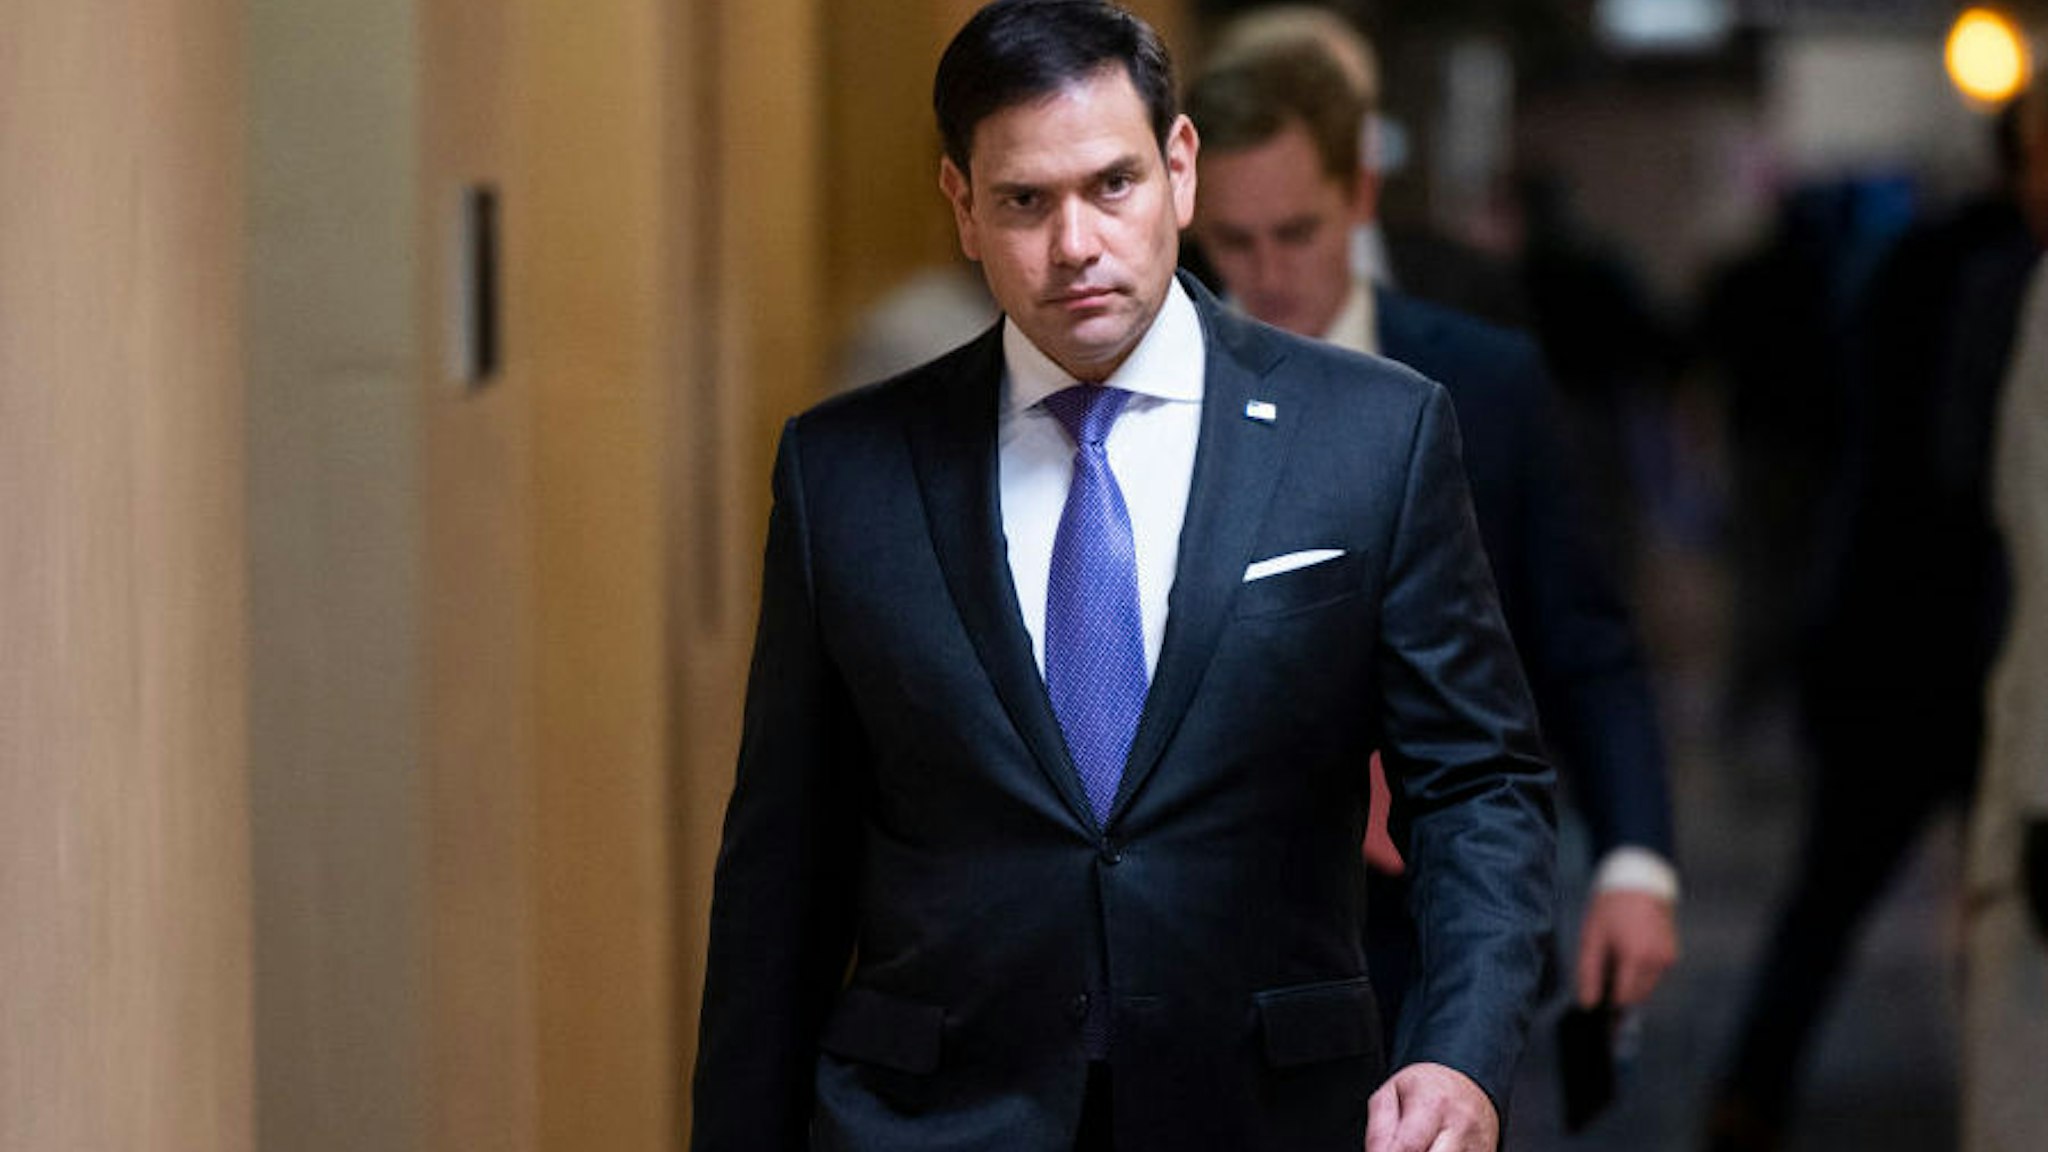 UNITED STATES - MAY 26: Sen. Marco Rubio, R-Fla., walks to the Senate subway after a vote in the U.S. Capitol on Wednesday, May 26, 2021.